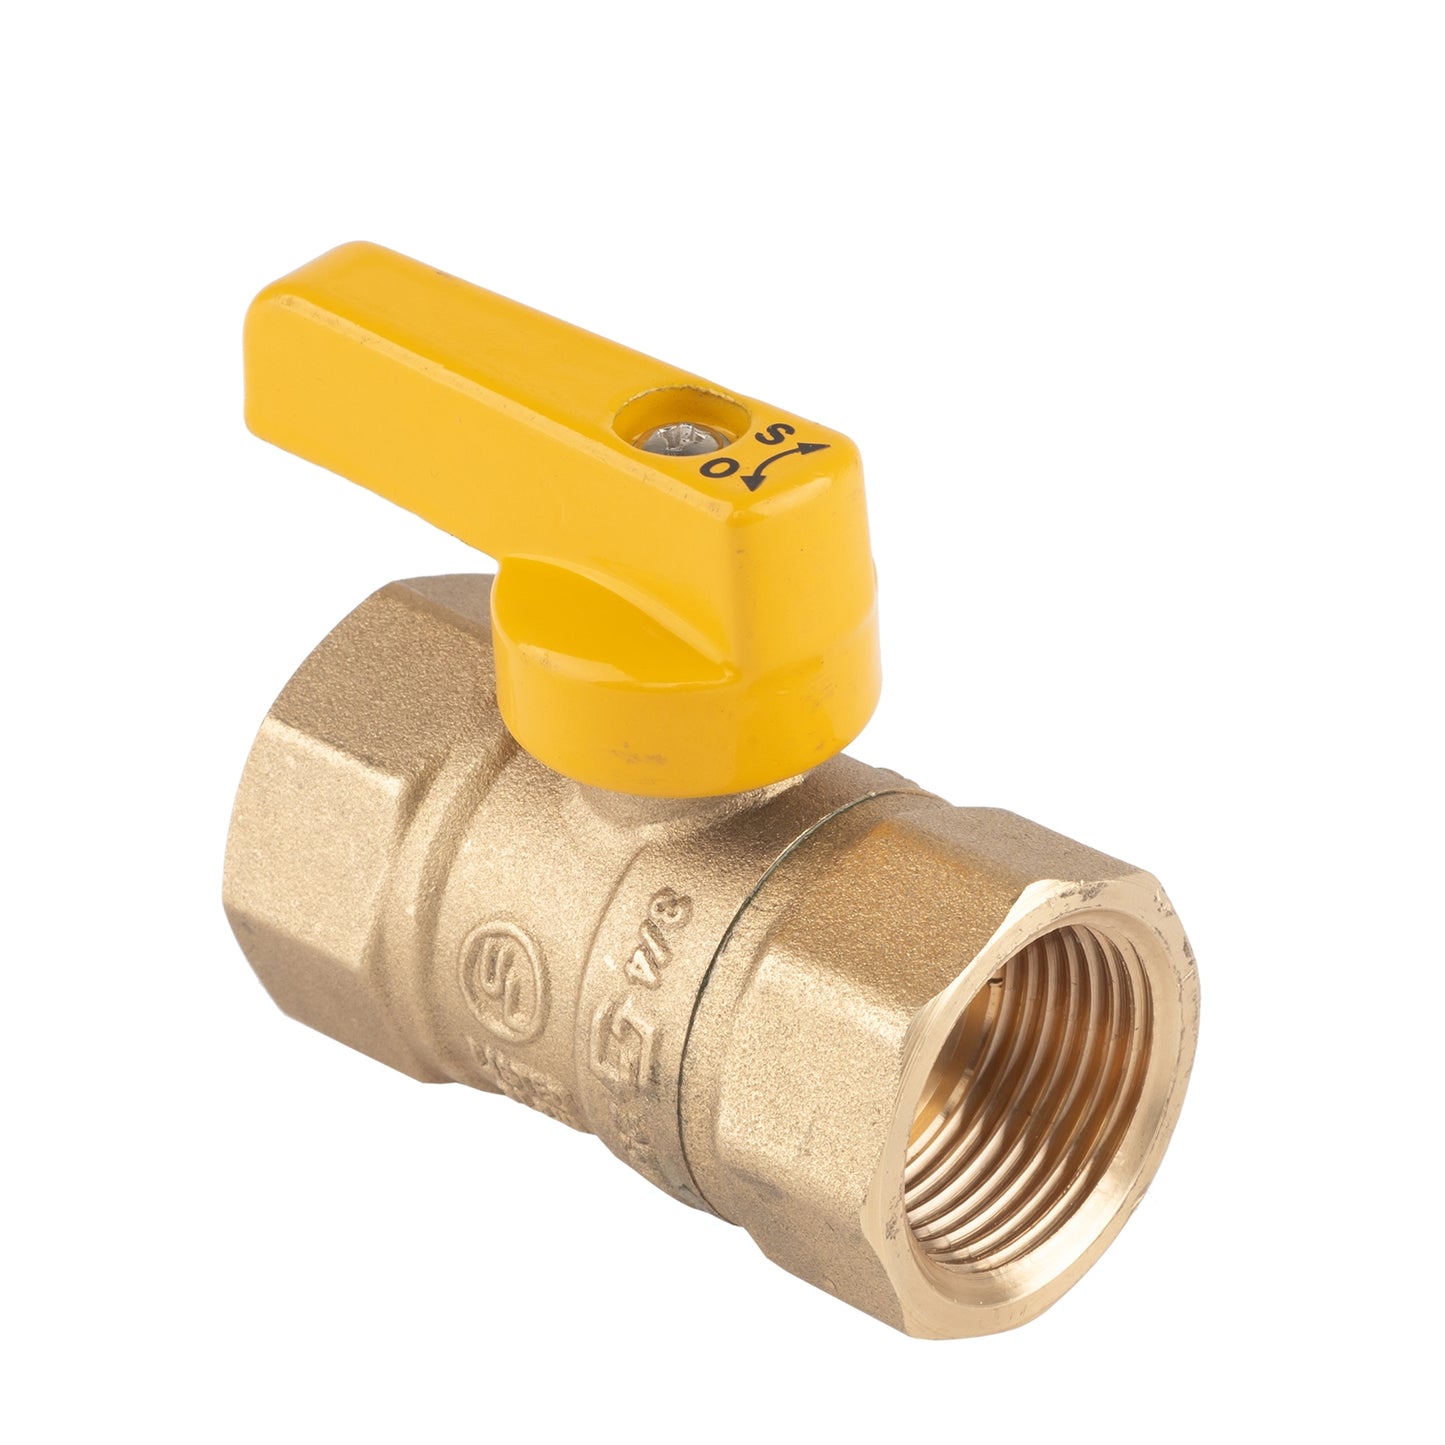 Hausen 3/4-inch FIP (Female Iron Pipe) x 3/4-inch FIP (Female Iron Pipe) Straight Gas Ball Valve with 1/4-Turn Lift and Lock Handle; Forged Brass; Blowout-Resistant Stem; CSA and UL Certified; 5-Pack